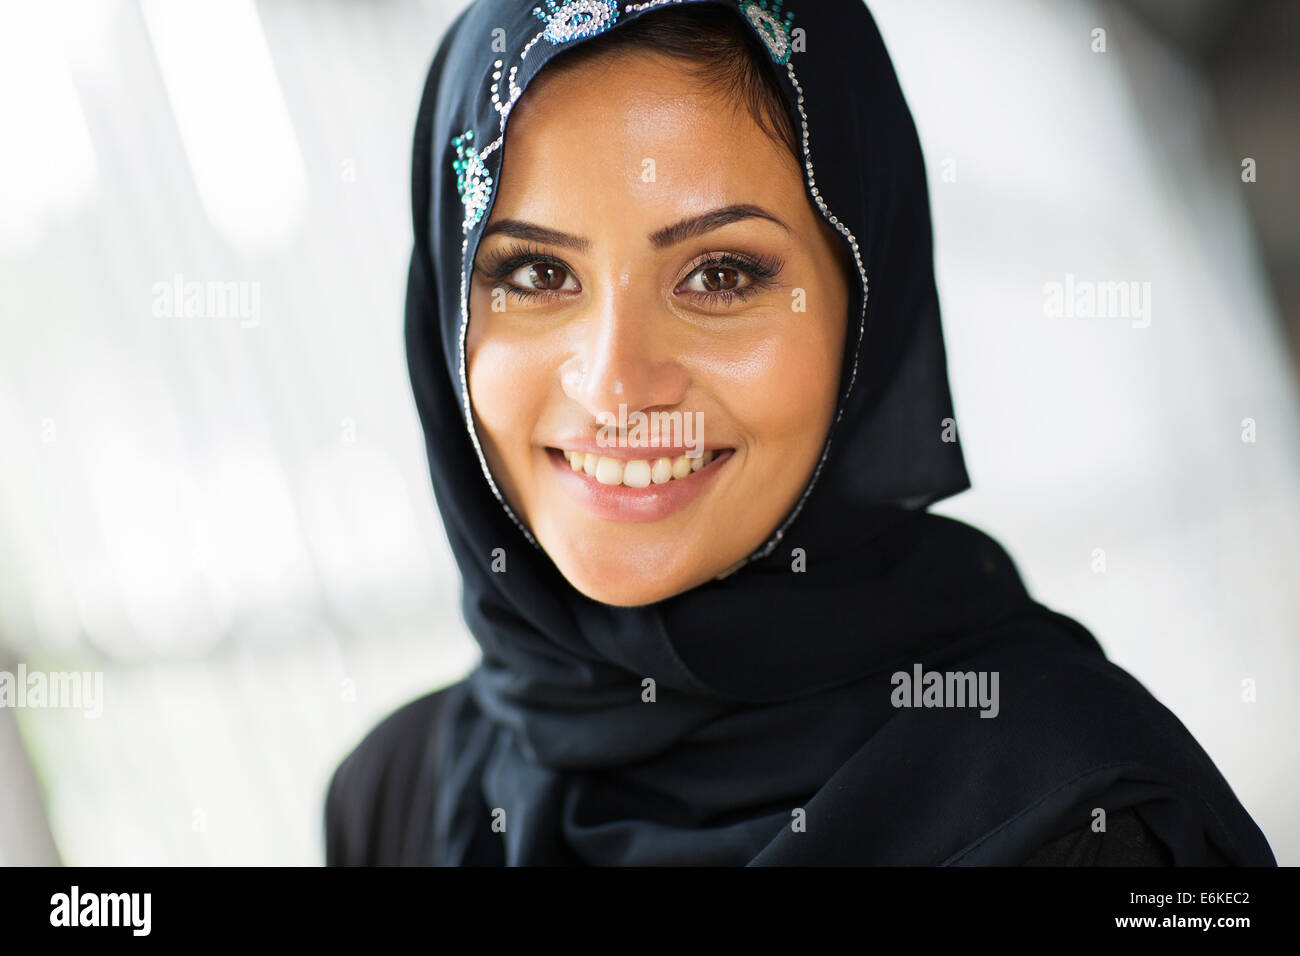 pretty middle eastern woman close up portrait Stock Photo